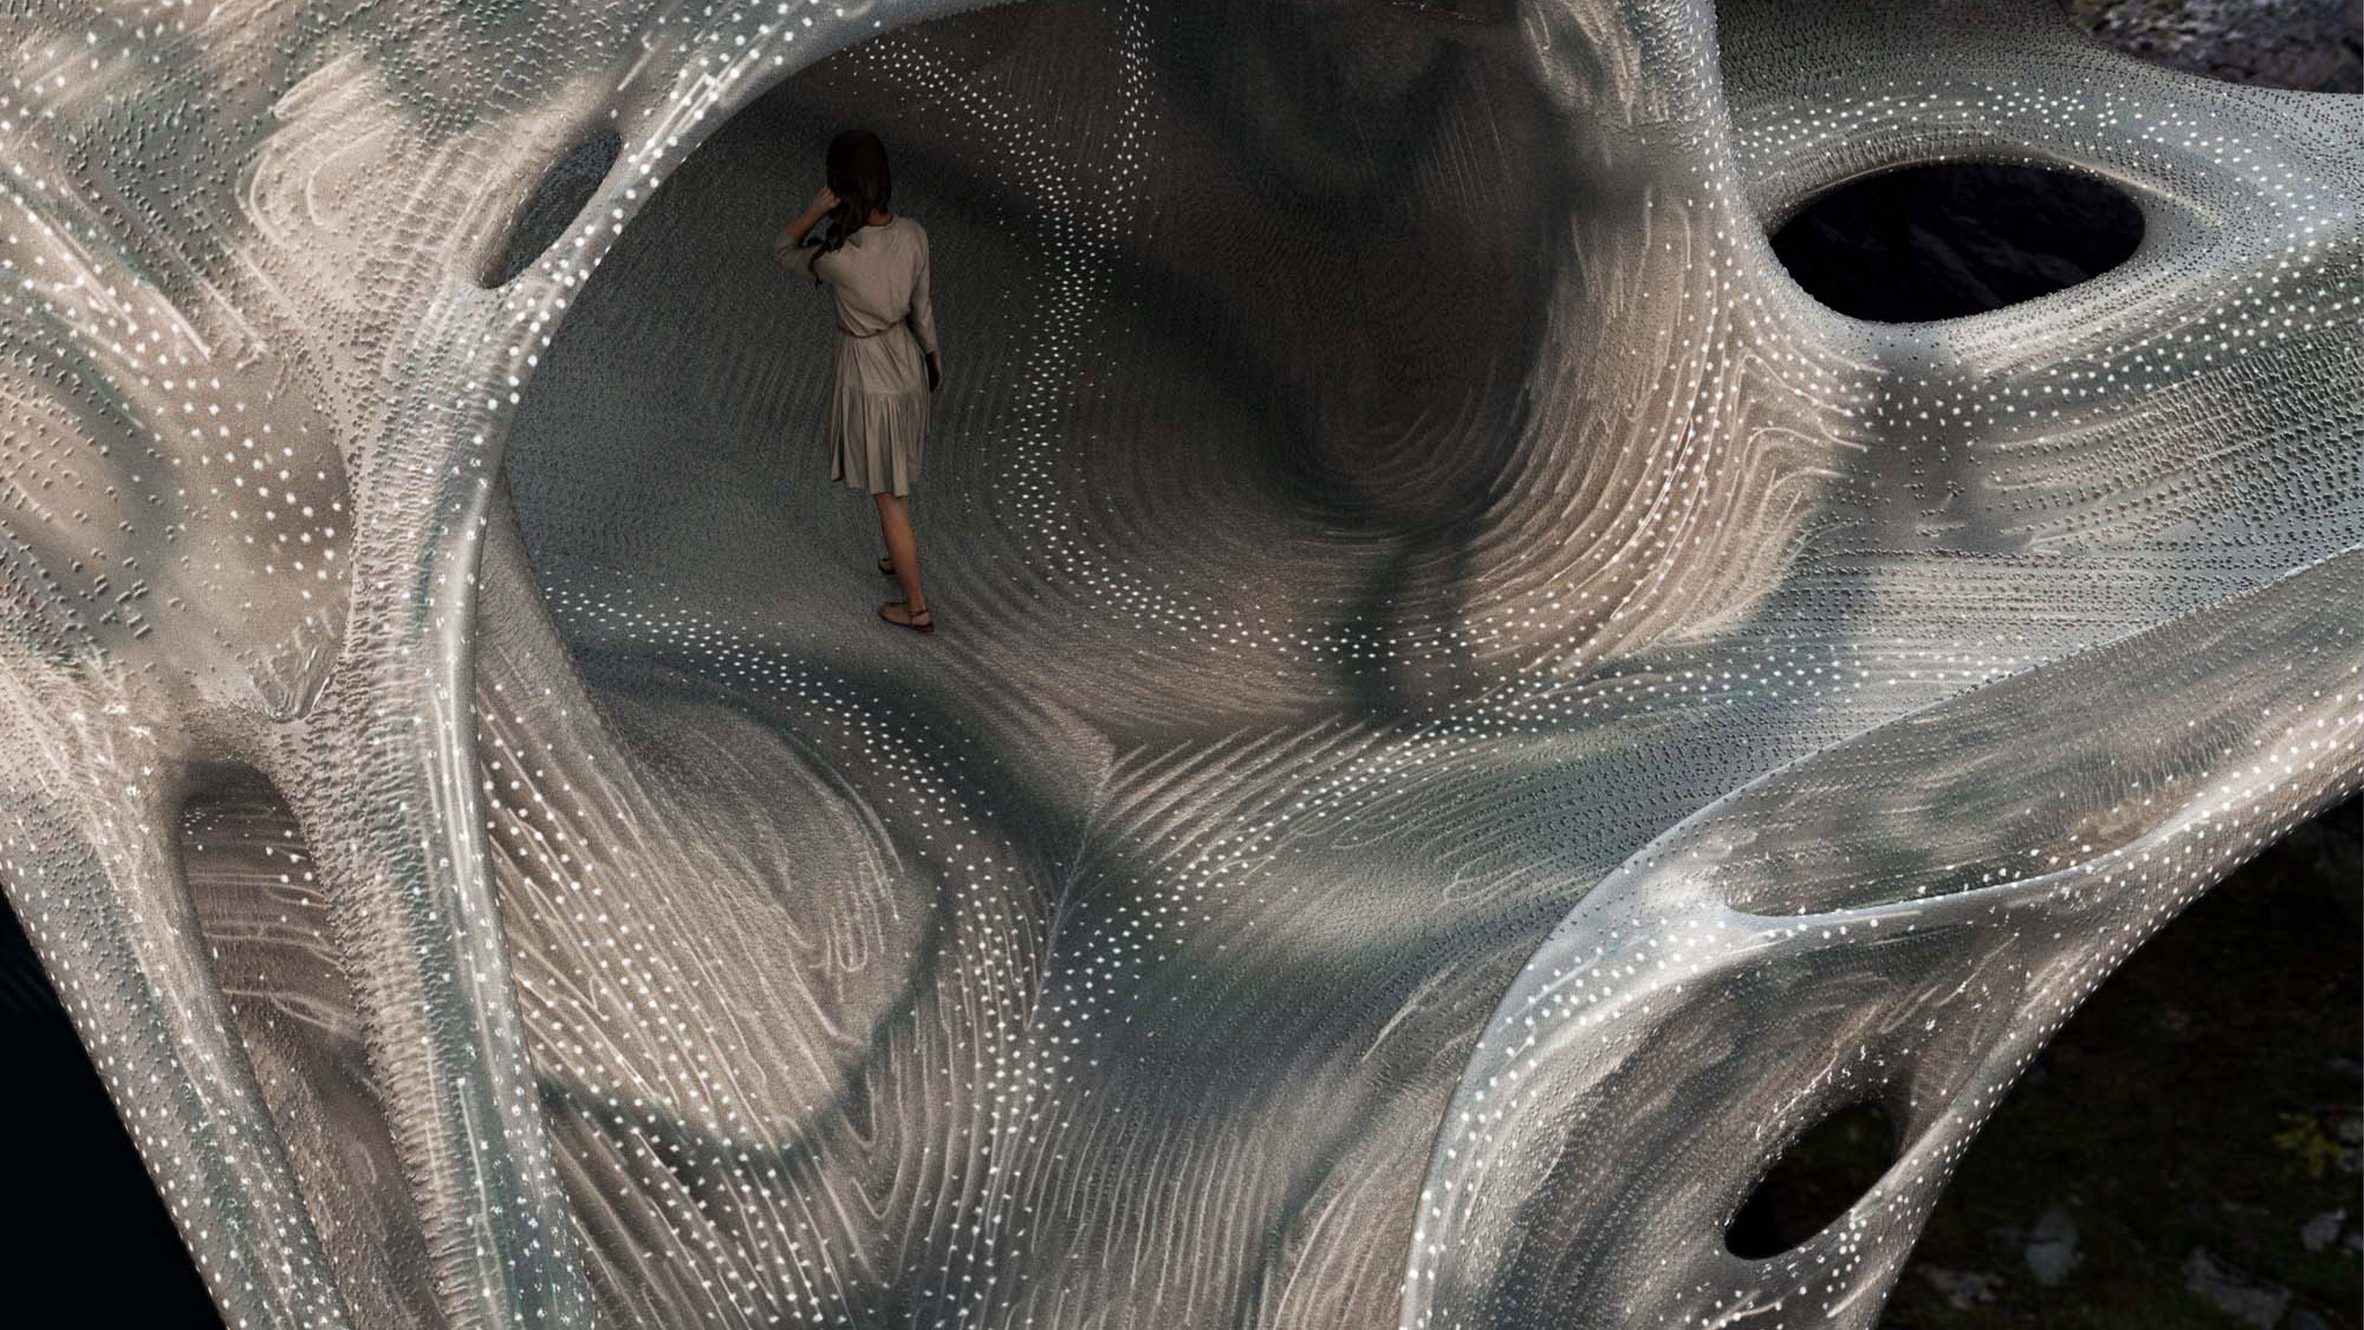 Softbiome's digital visual of a female standing in a cave of an organic shape